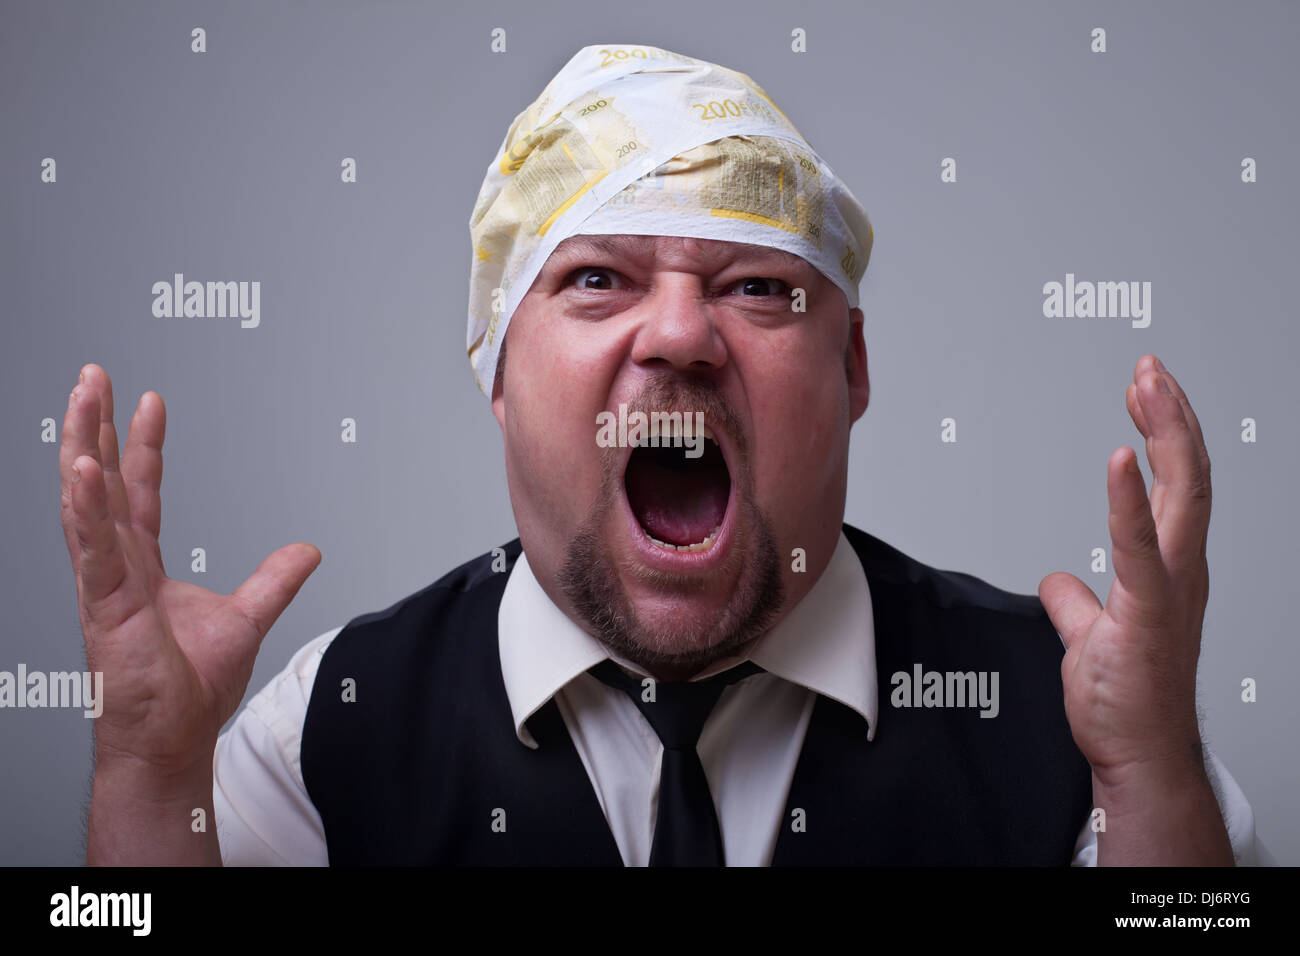 Businessman having financial problems - with euro banknotes bandage on head Stock Photo